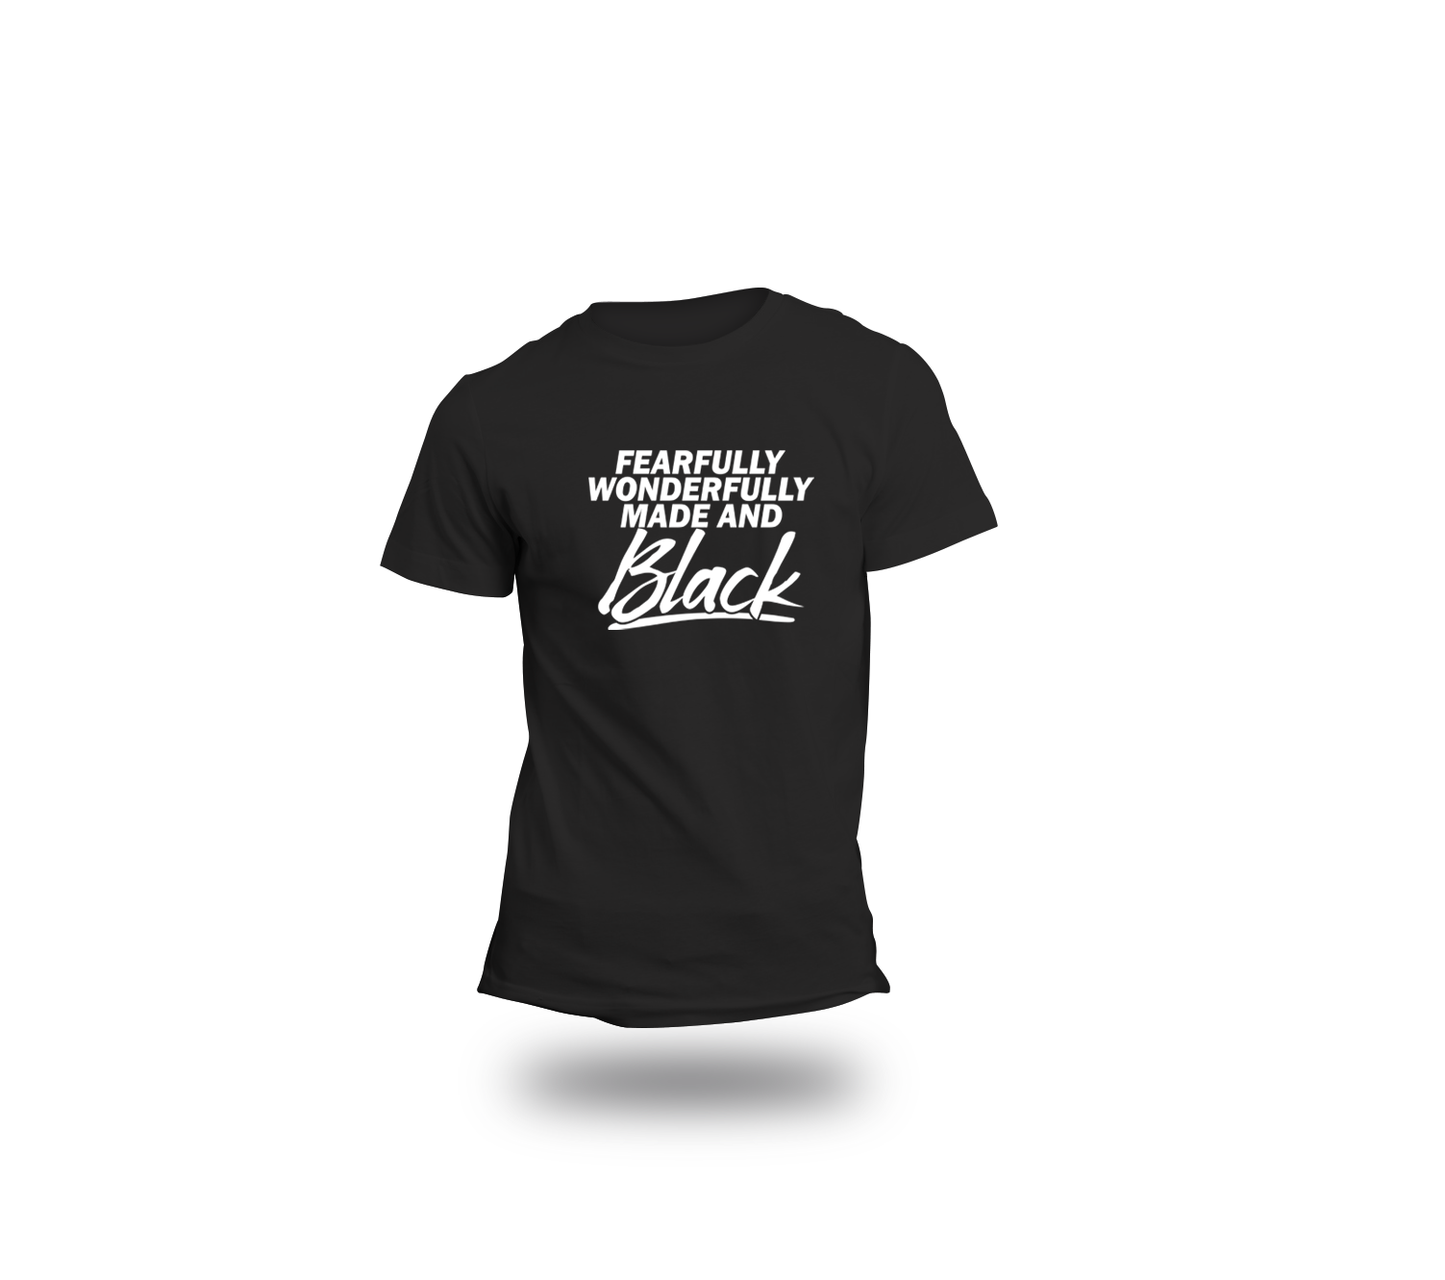 Fearfully Wonderfully Made and Black T shirt